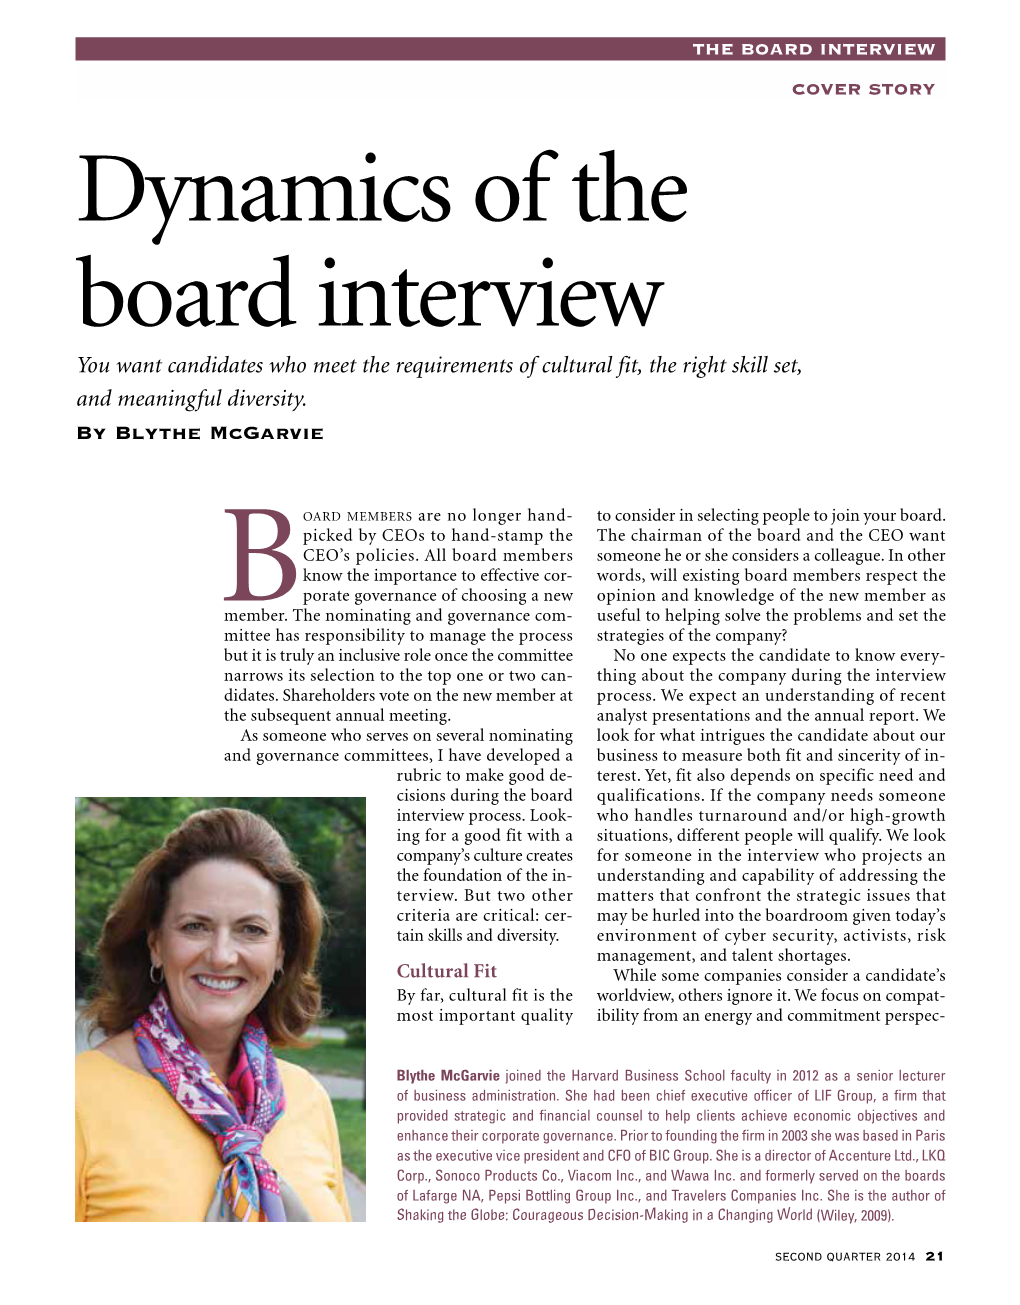 Dynamics of the Board Interview You Want Candidates Who Meet the Requirements of Cultural Fit, the Right Skill Set, and Meaningful Diversity